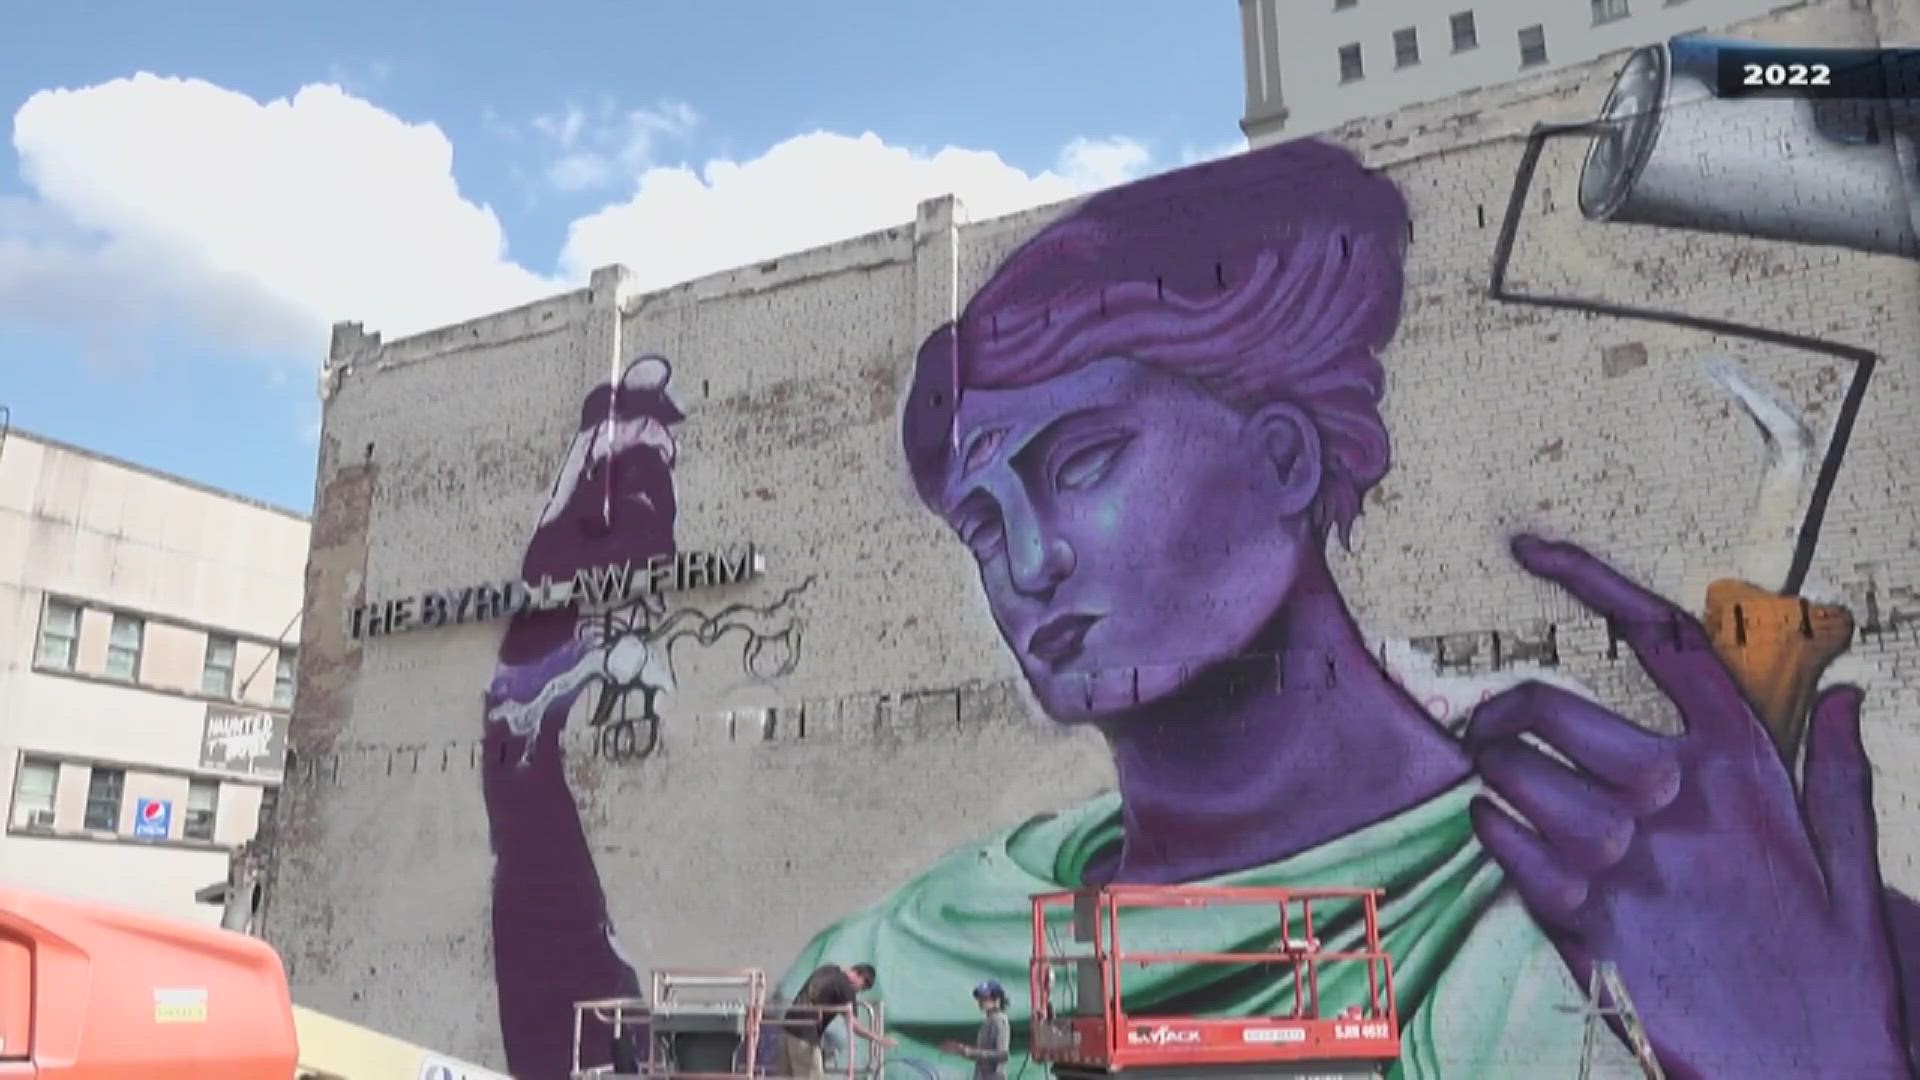 For the second year in a row Beaumont will be turned into a wonderland of art as mural fest kicks off and artists begin painting at sites around the city.